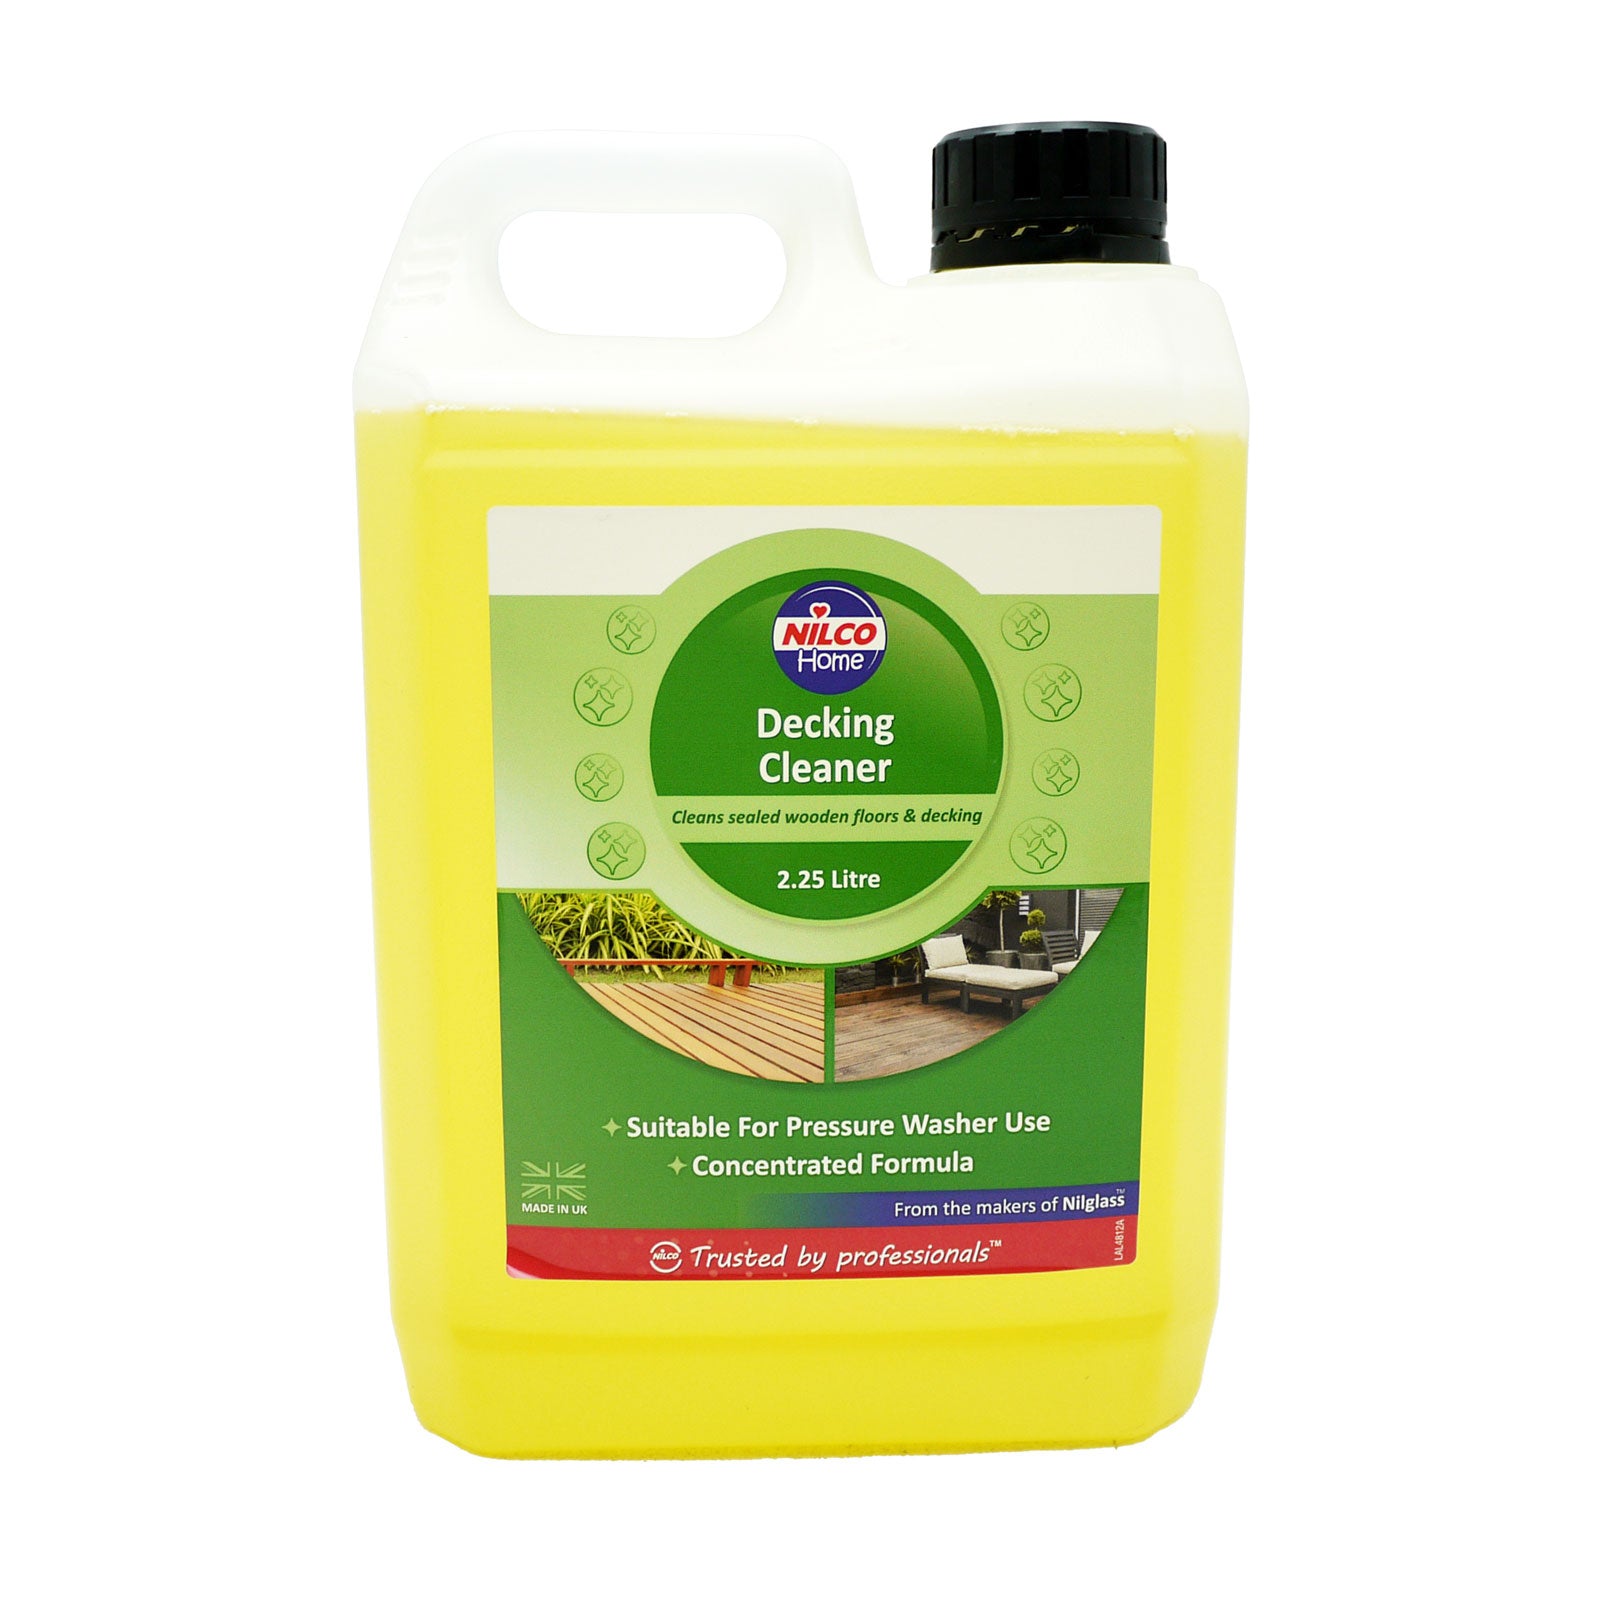 Nilco Professional Decking Cleaner 2.25L